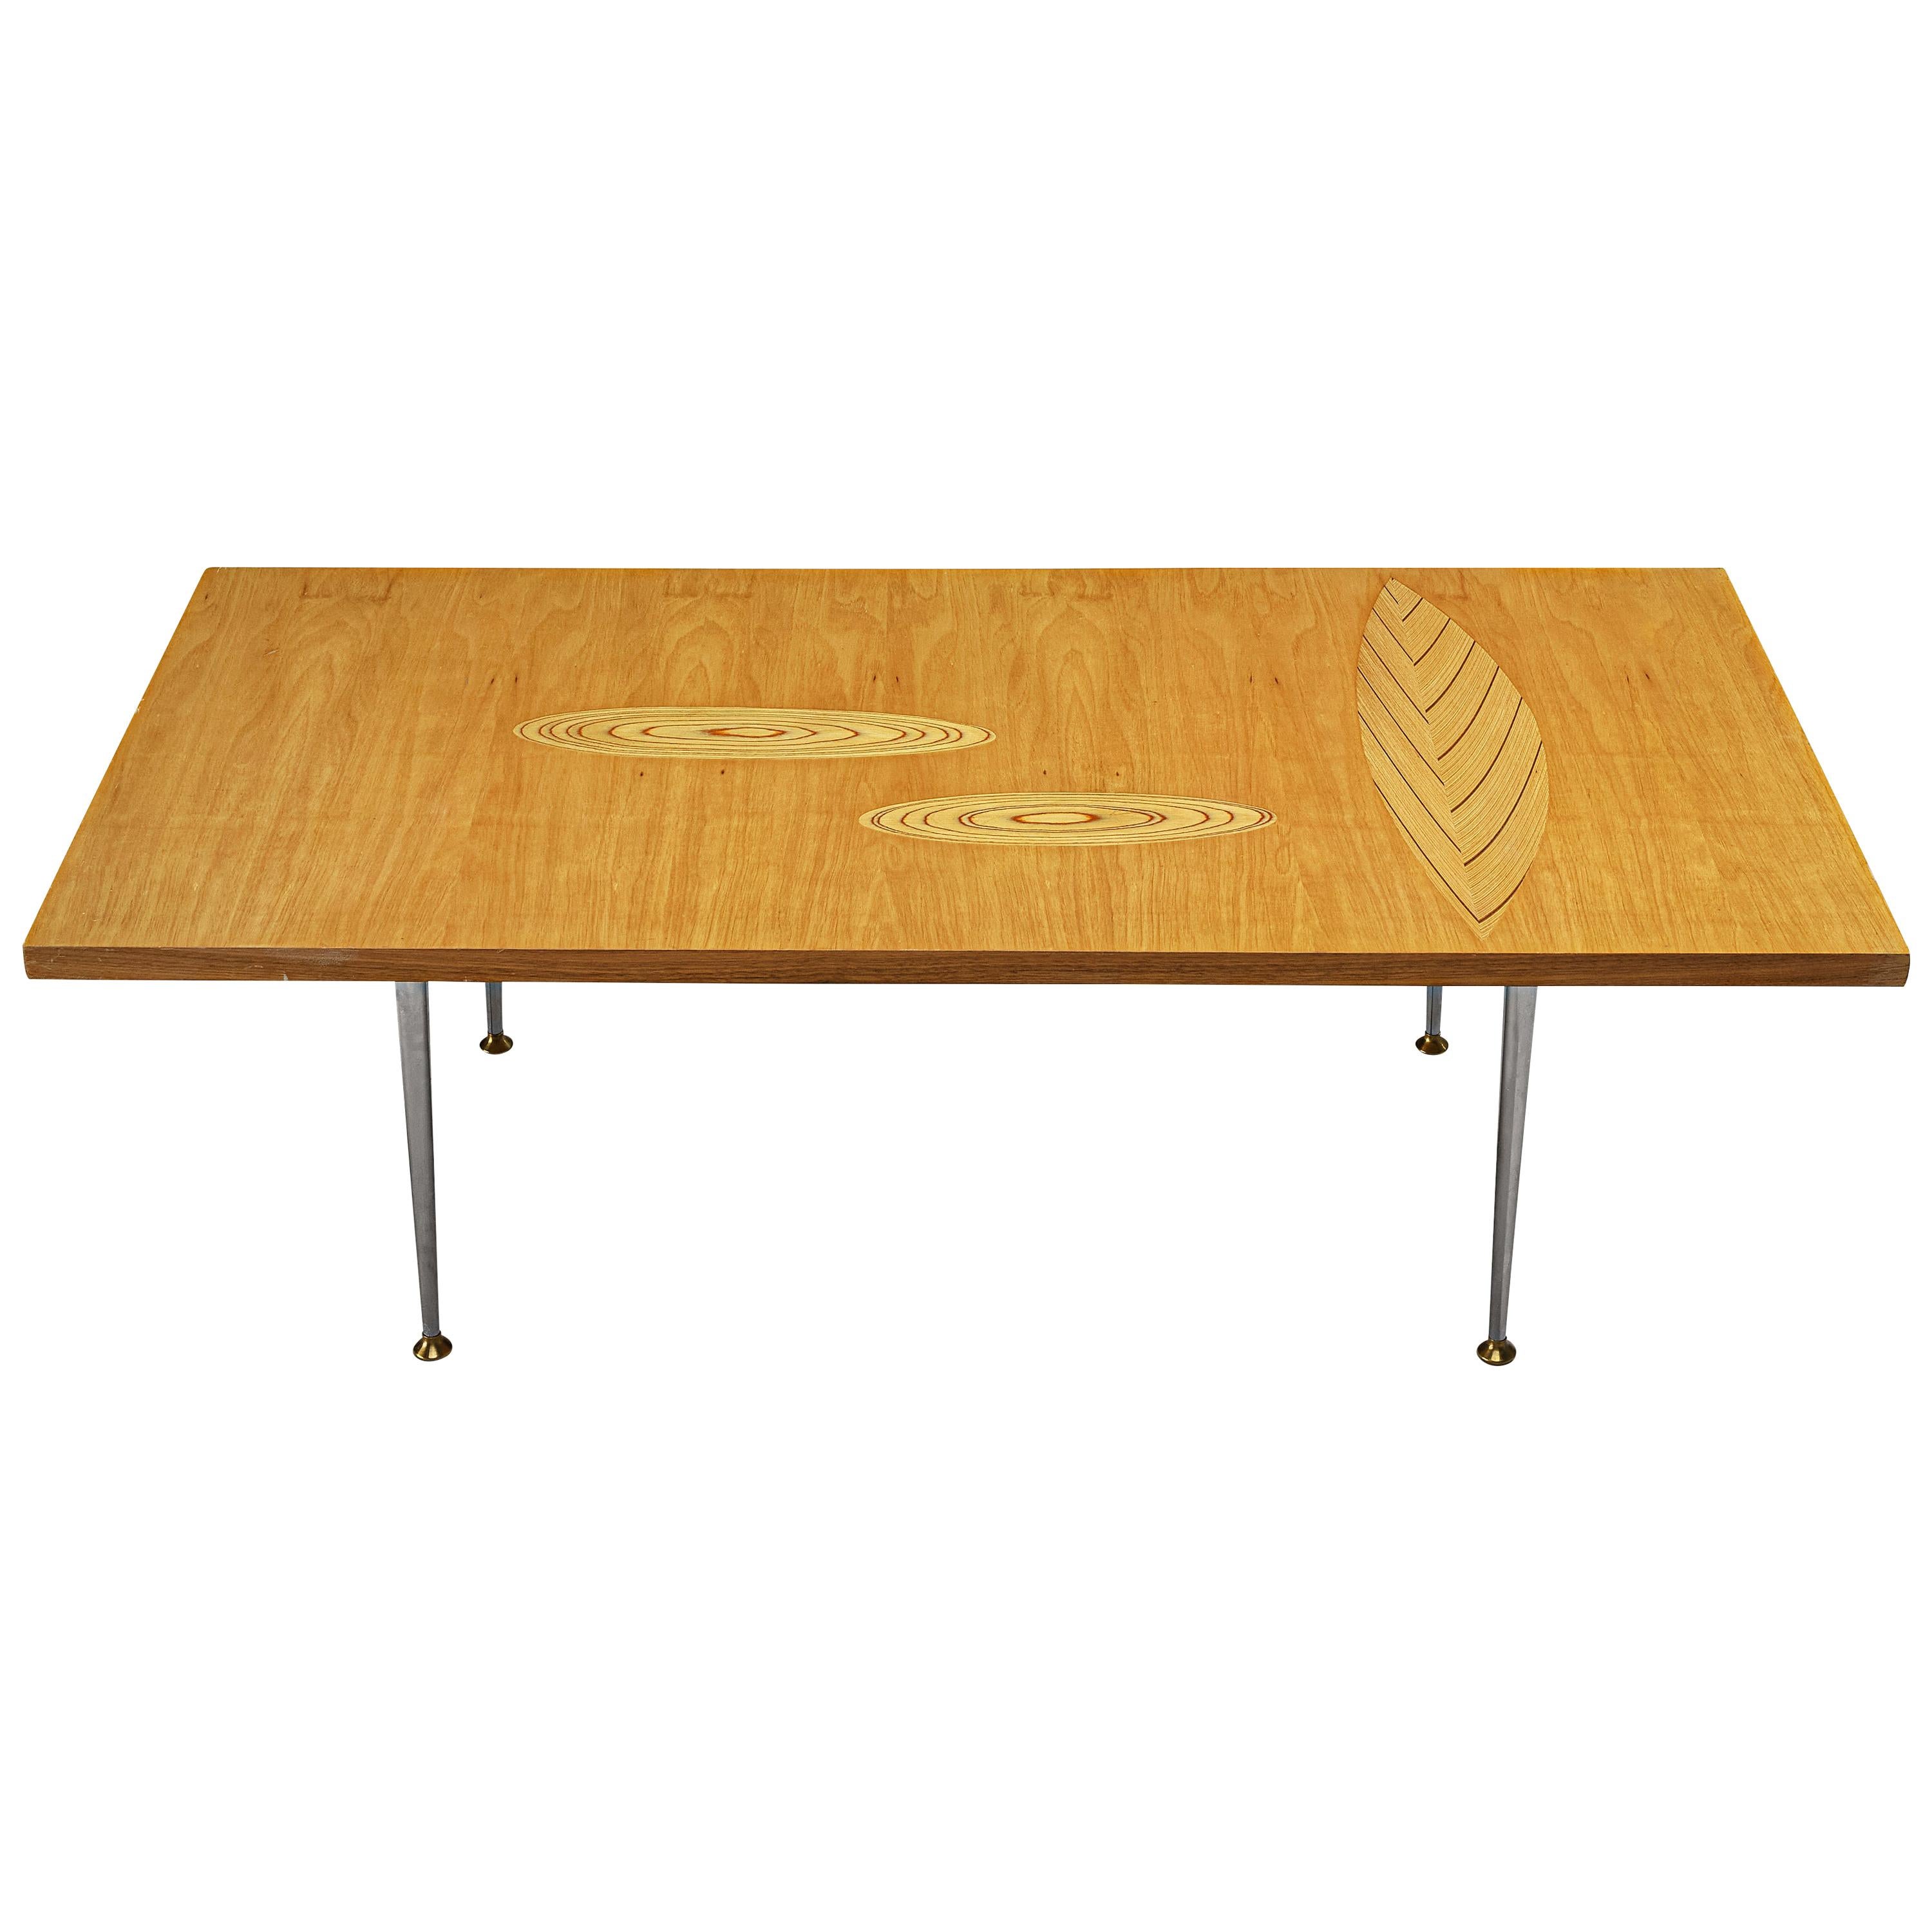 Tapio Wirkkala for Asko Coffee Table in Birch with Inlays For Sale